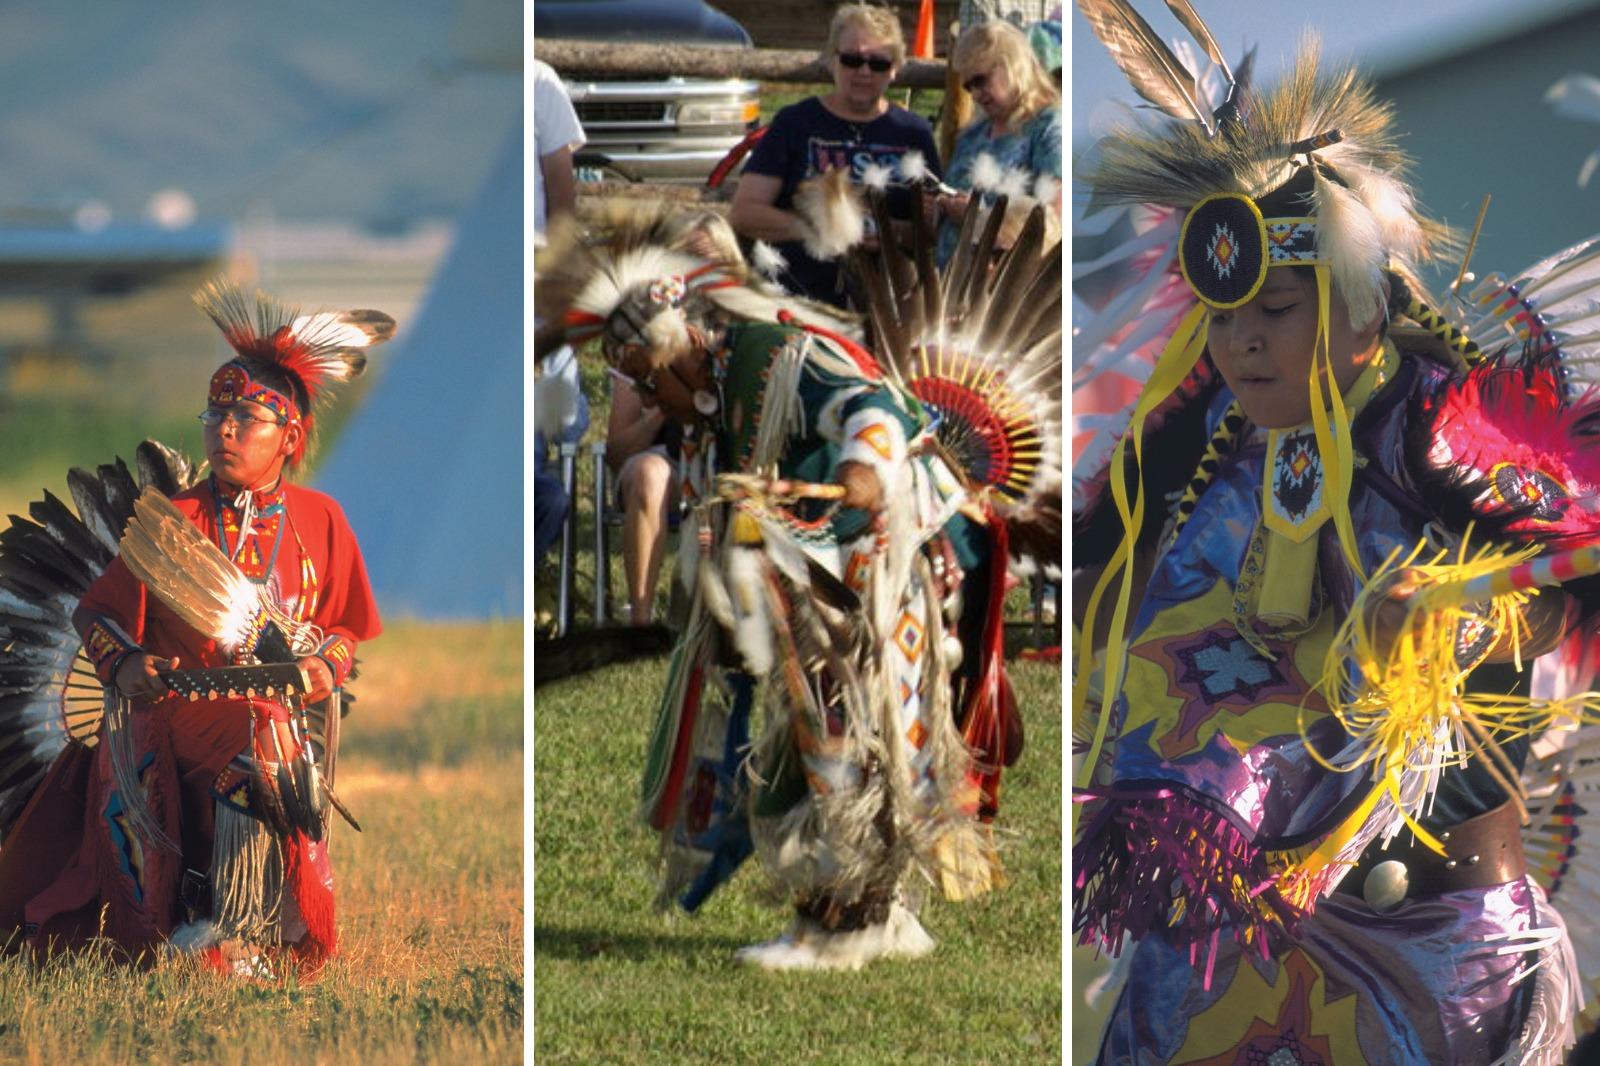 Native American dance exhibitions are one of the best Wyoming cultural experiences